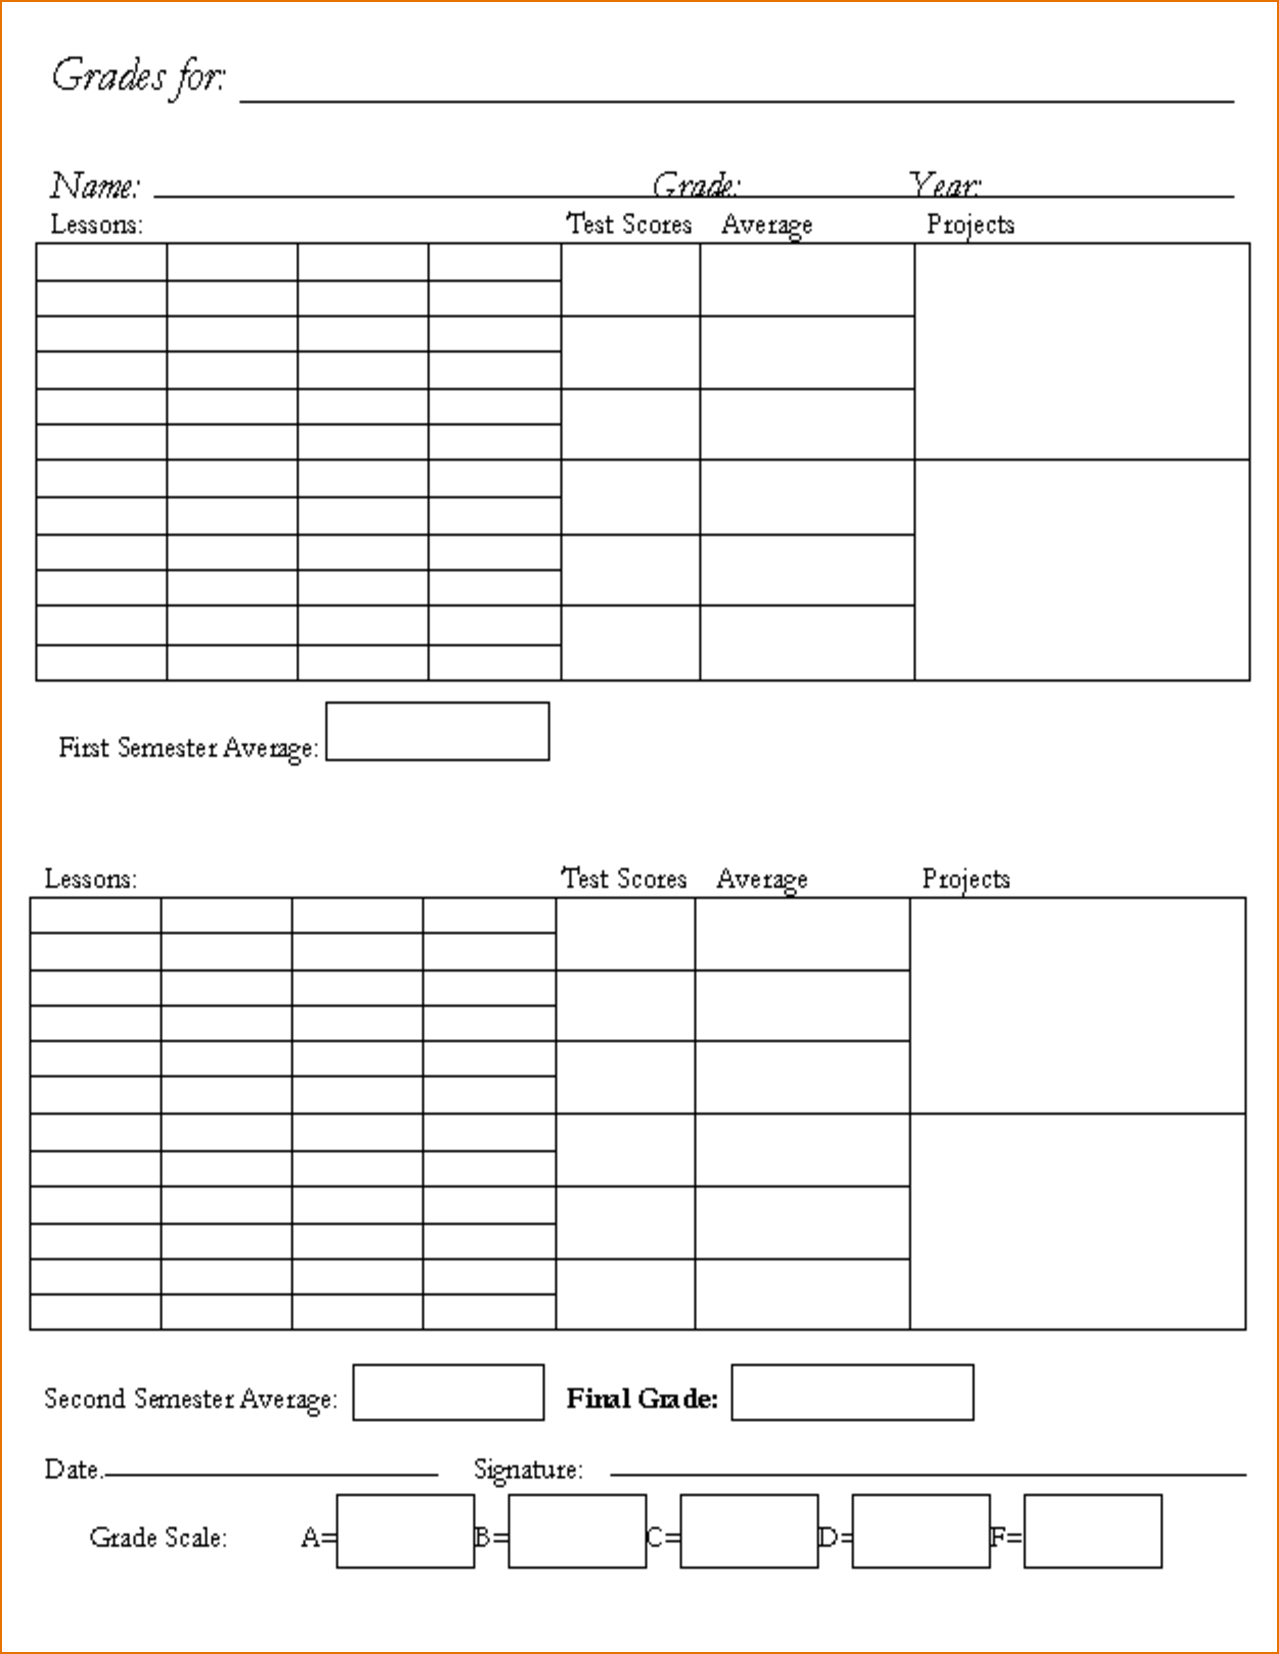 Name Card Template For Kindergarten Throughout Boyfriend With Kindergarten Report Card Template